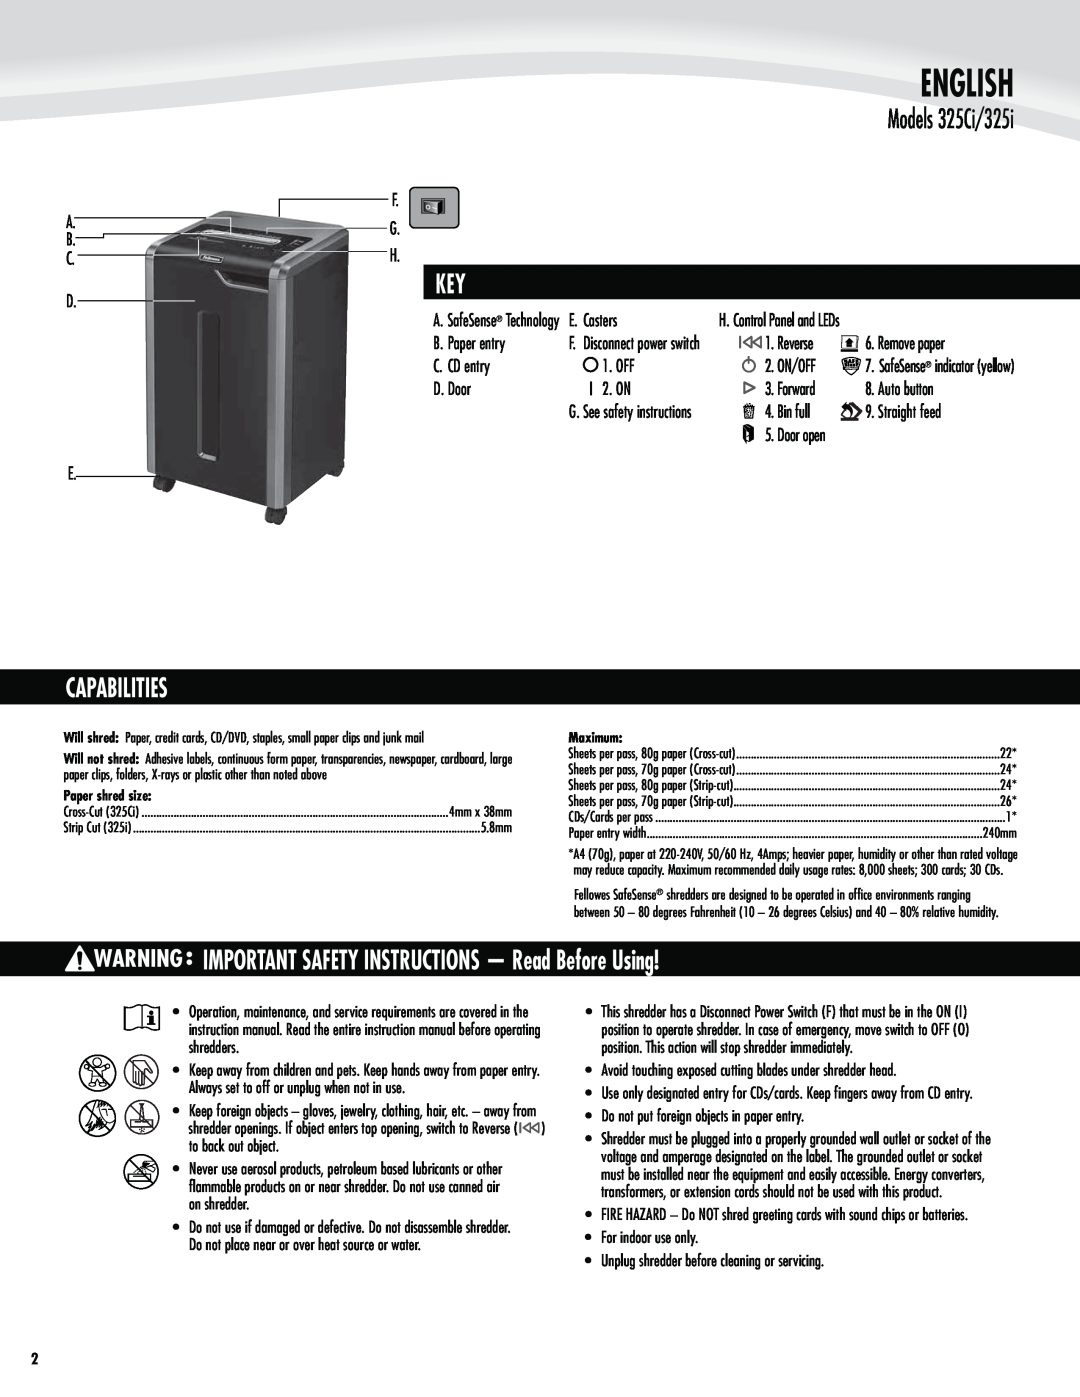 Fellowes manual English, Capabilities, IMPORTANT SAFETY INSTRUCTIONS - Read Before Using, Models 325Ci/325i 